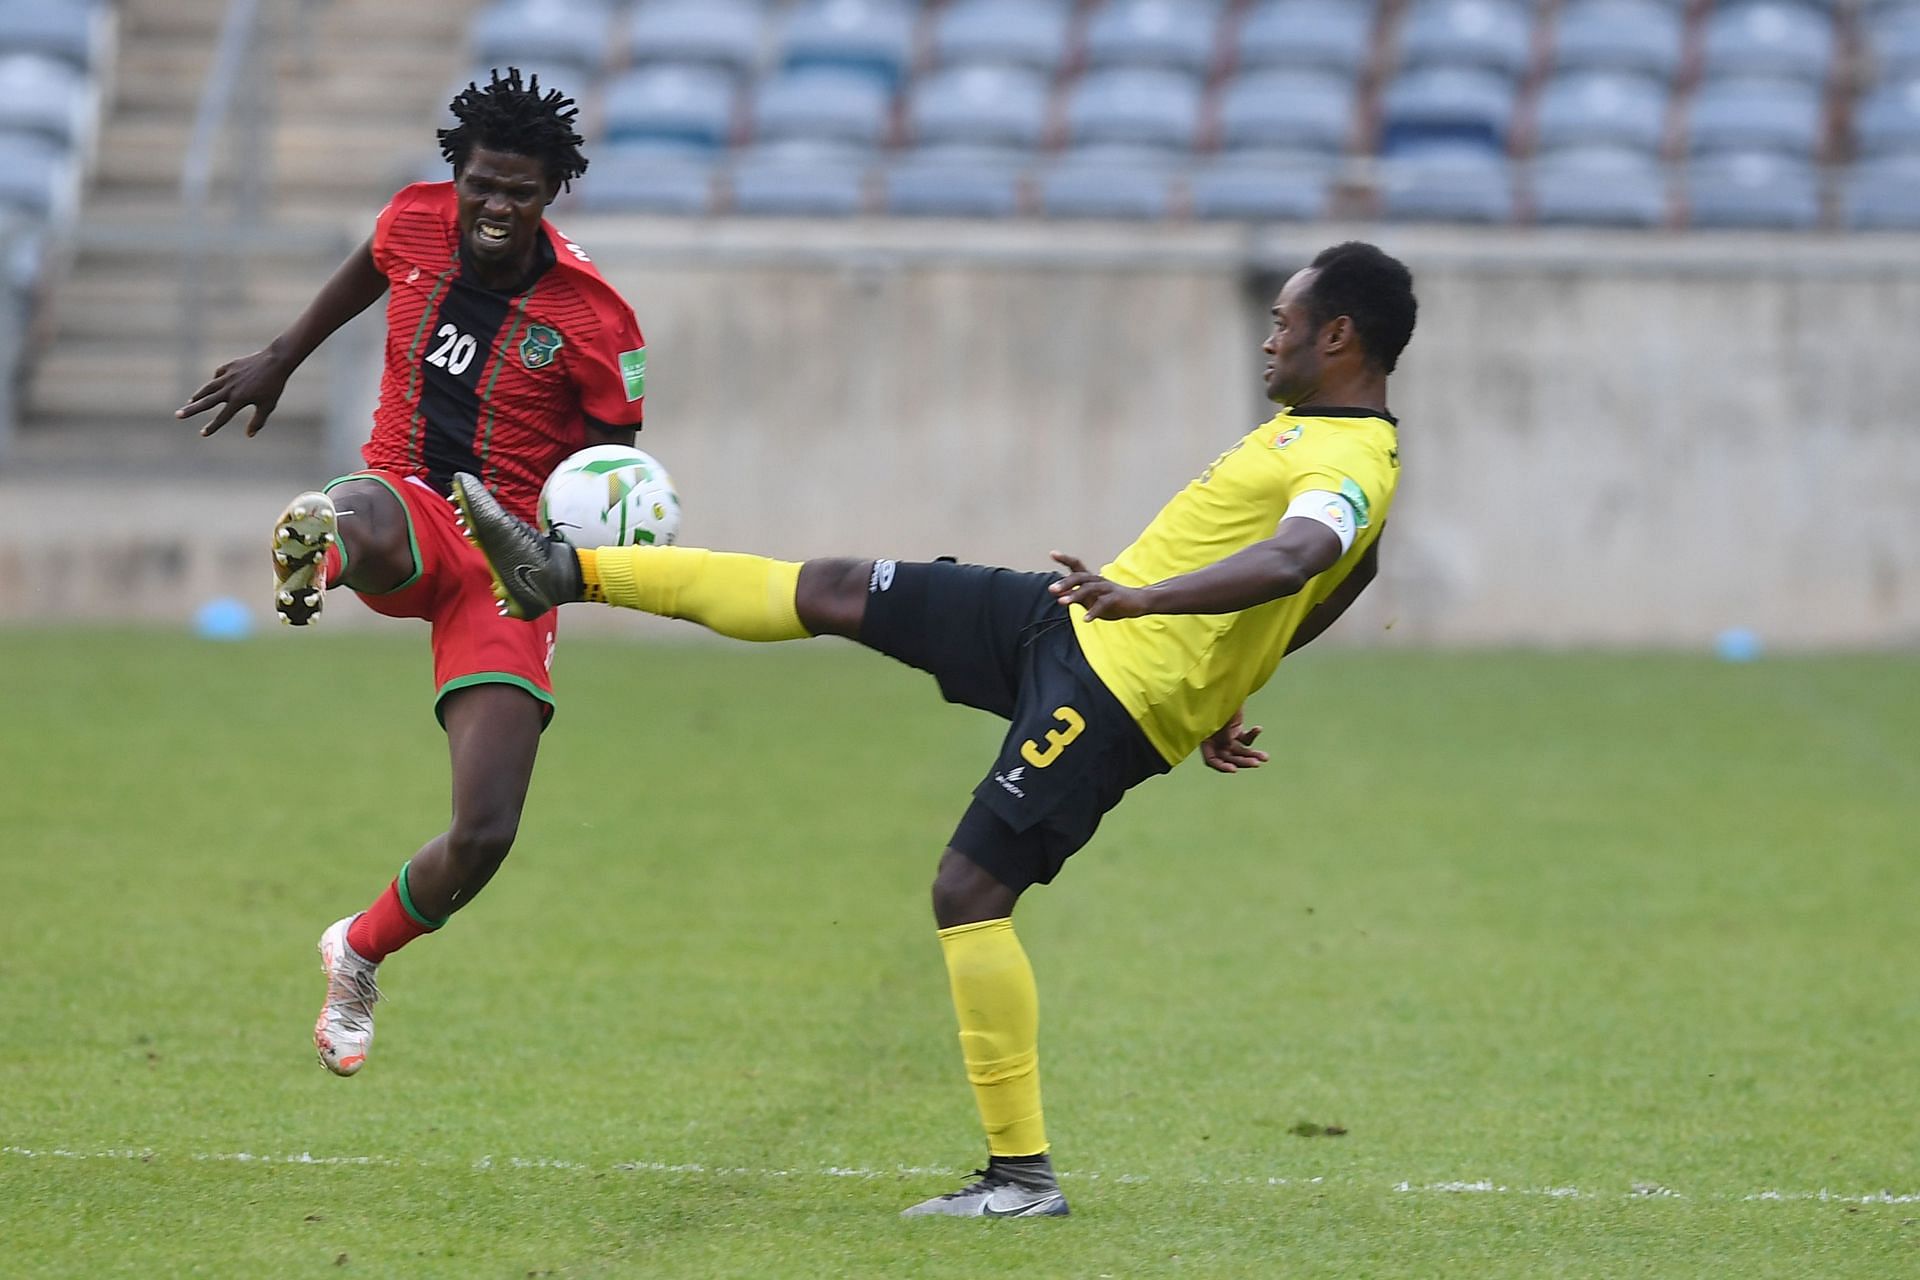 Mozambique and Rwanda have beaten each other twice each in four previous clashes